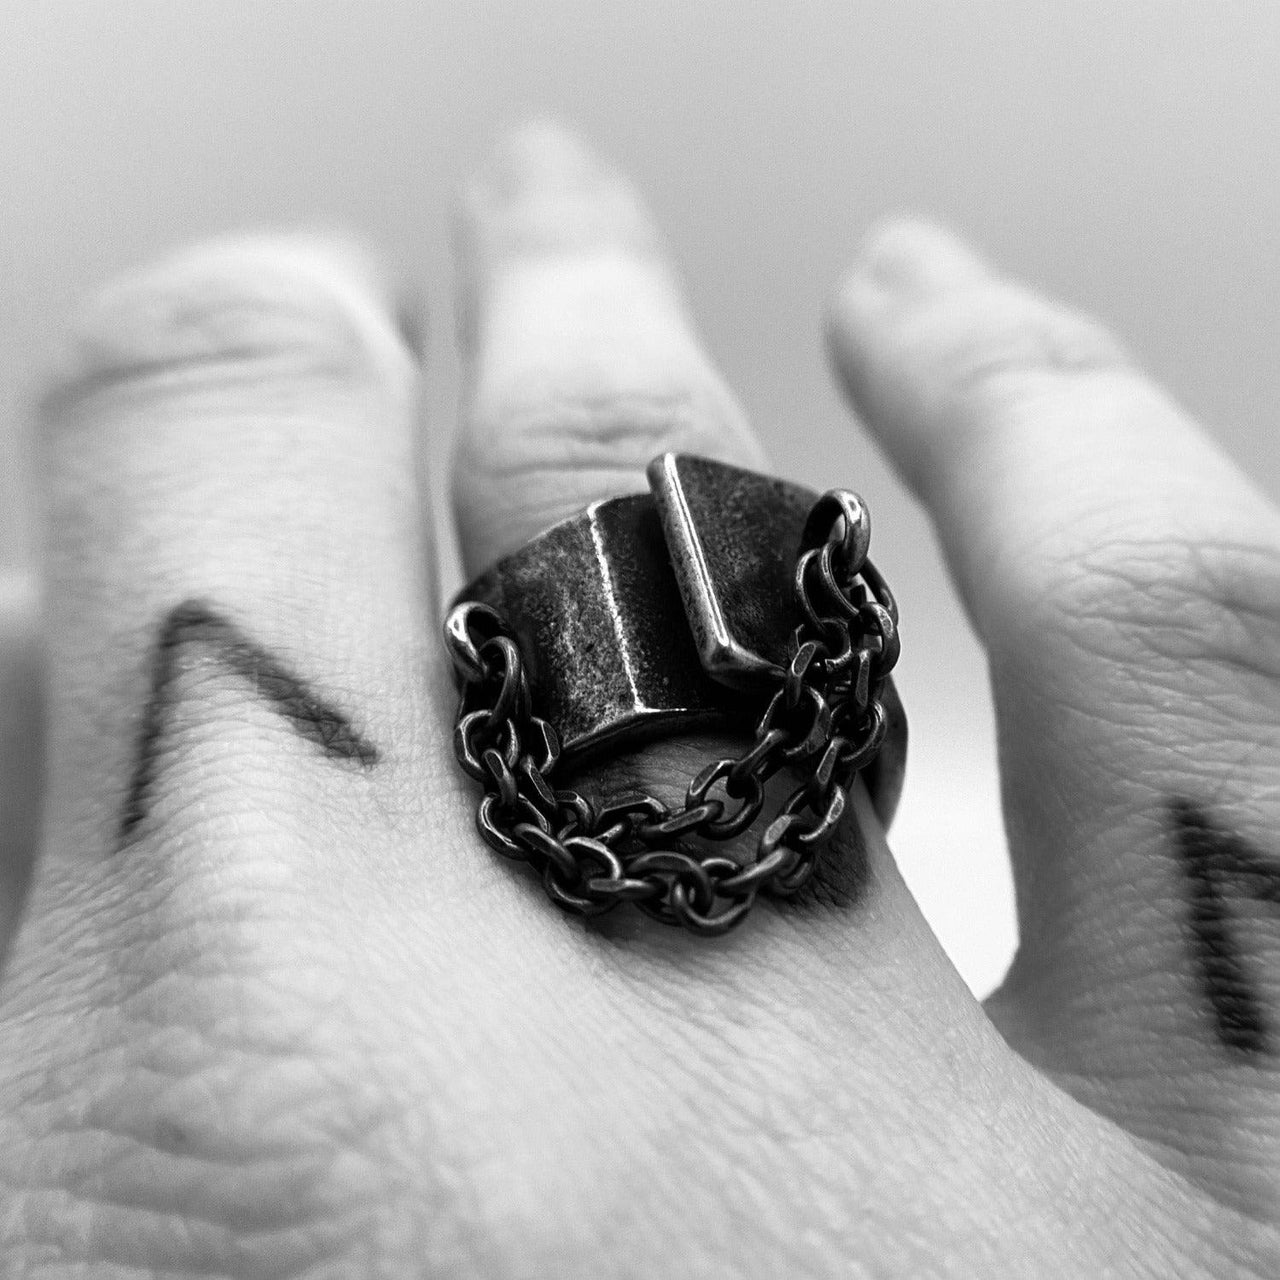 Punk Industrial Chain Ring - Black Feather Design